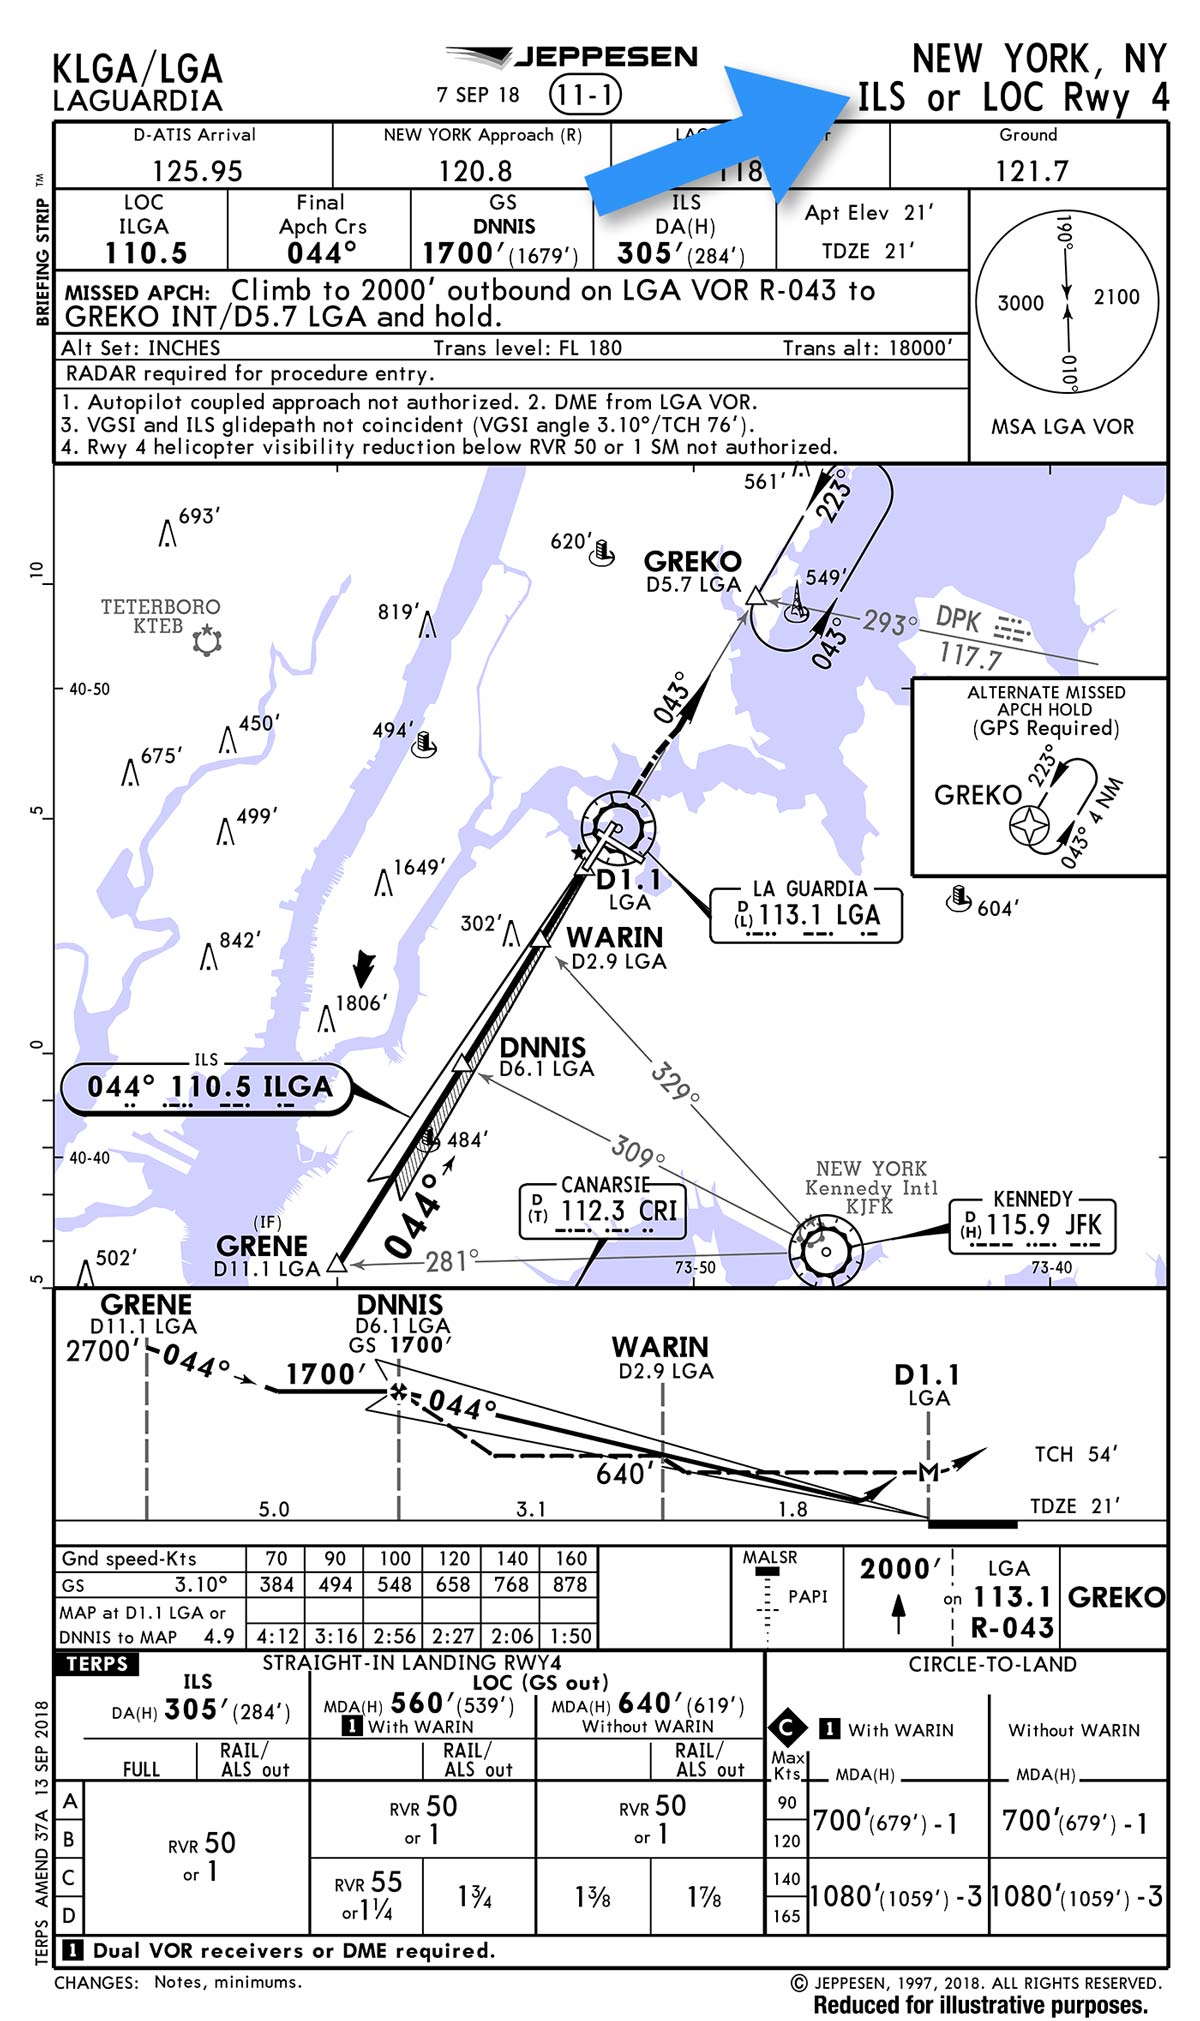 How To Brief A Jeppesen Approach Chart, In 11 Steps | Boldmethod